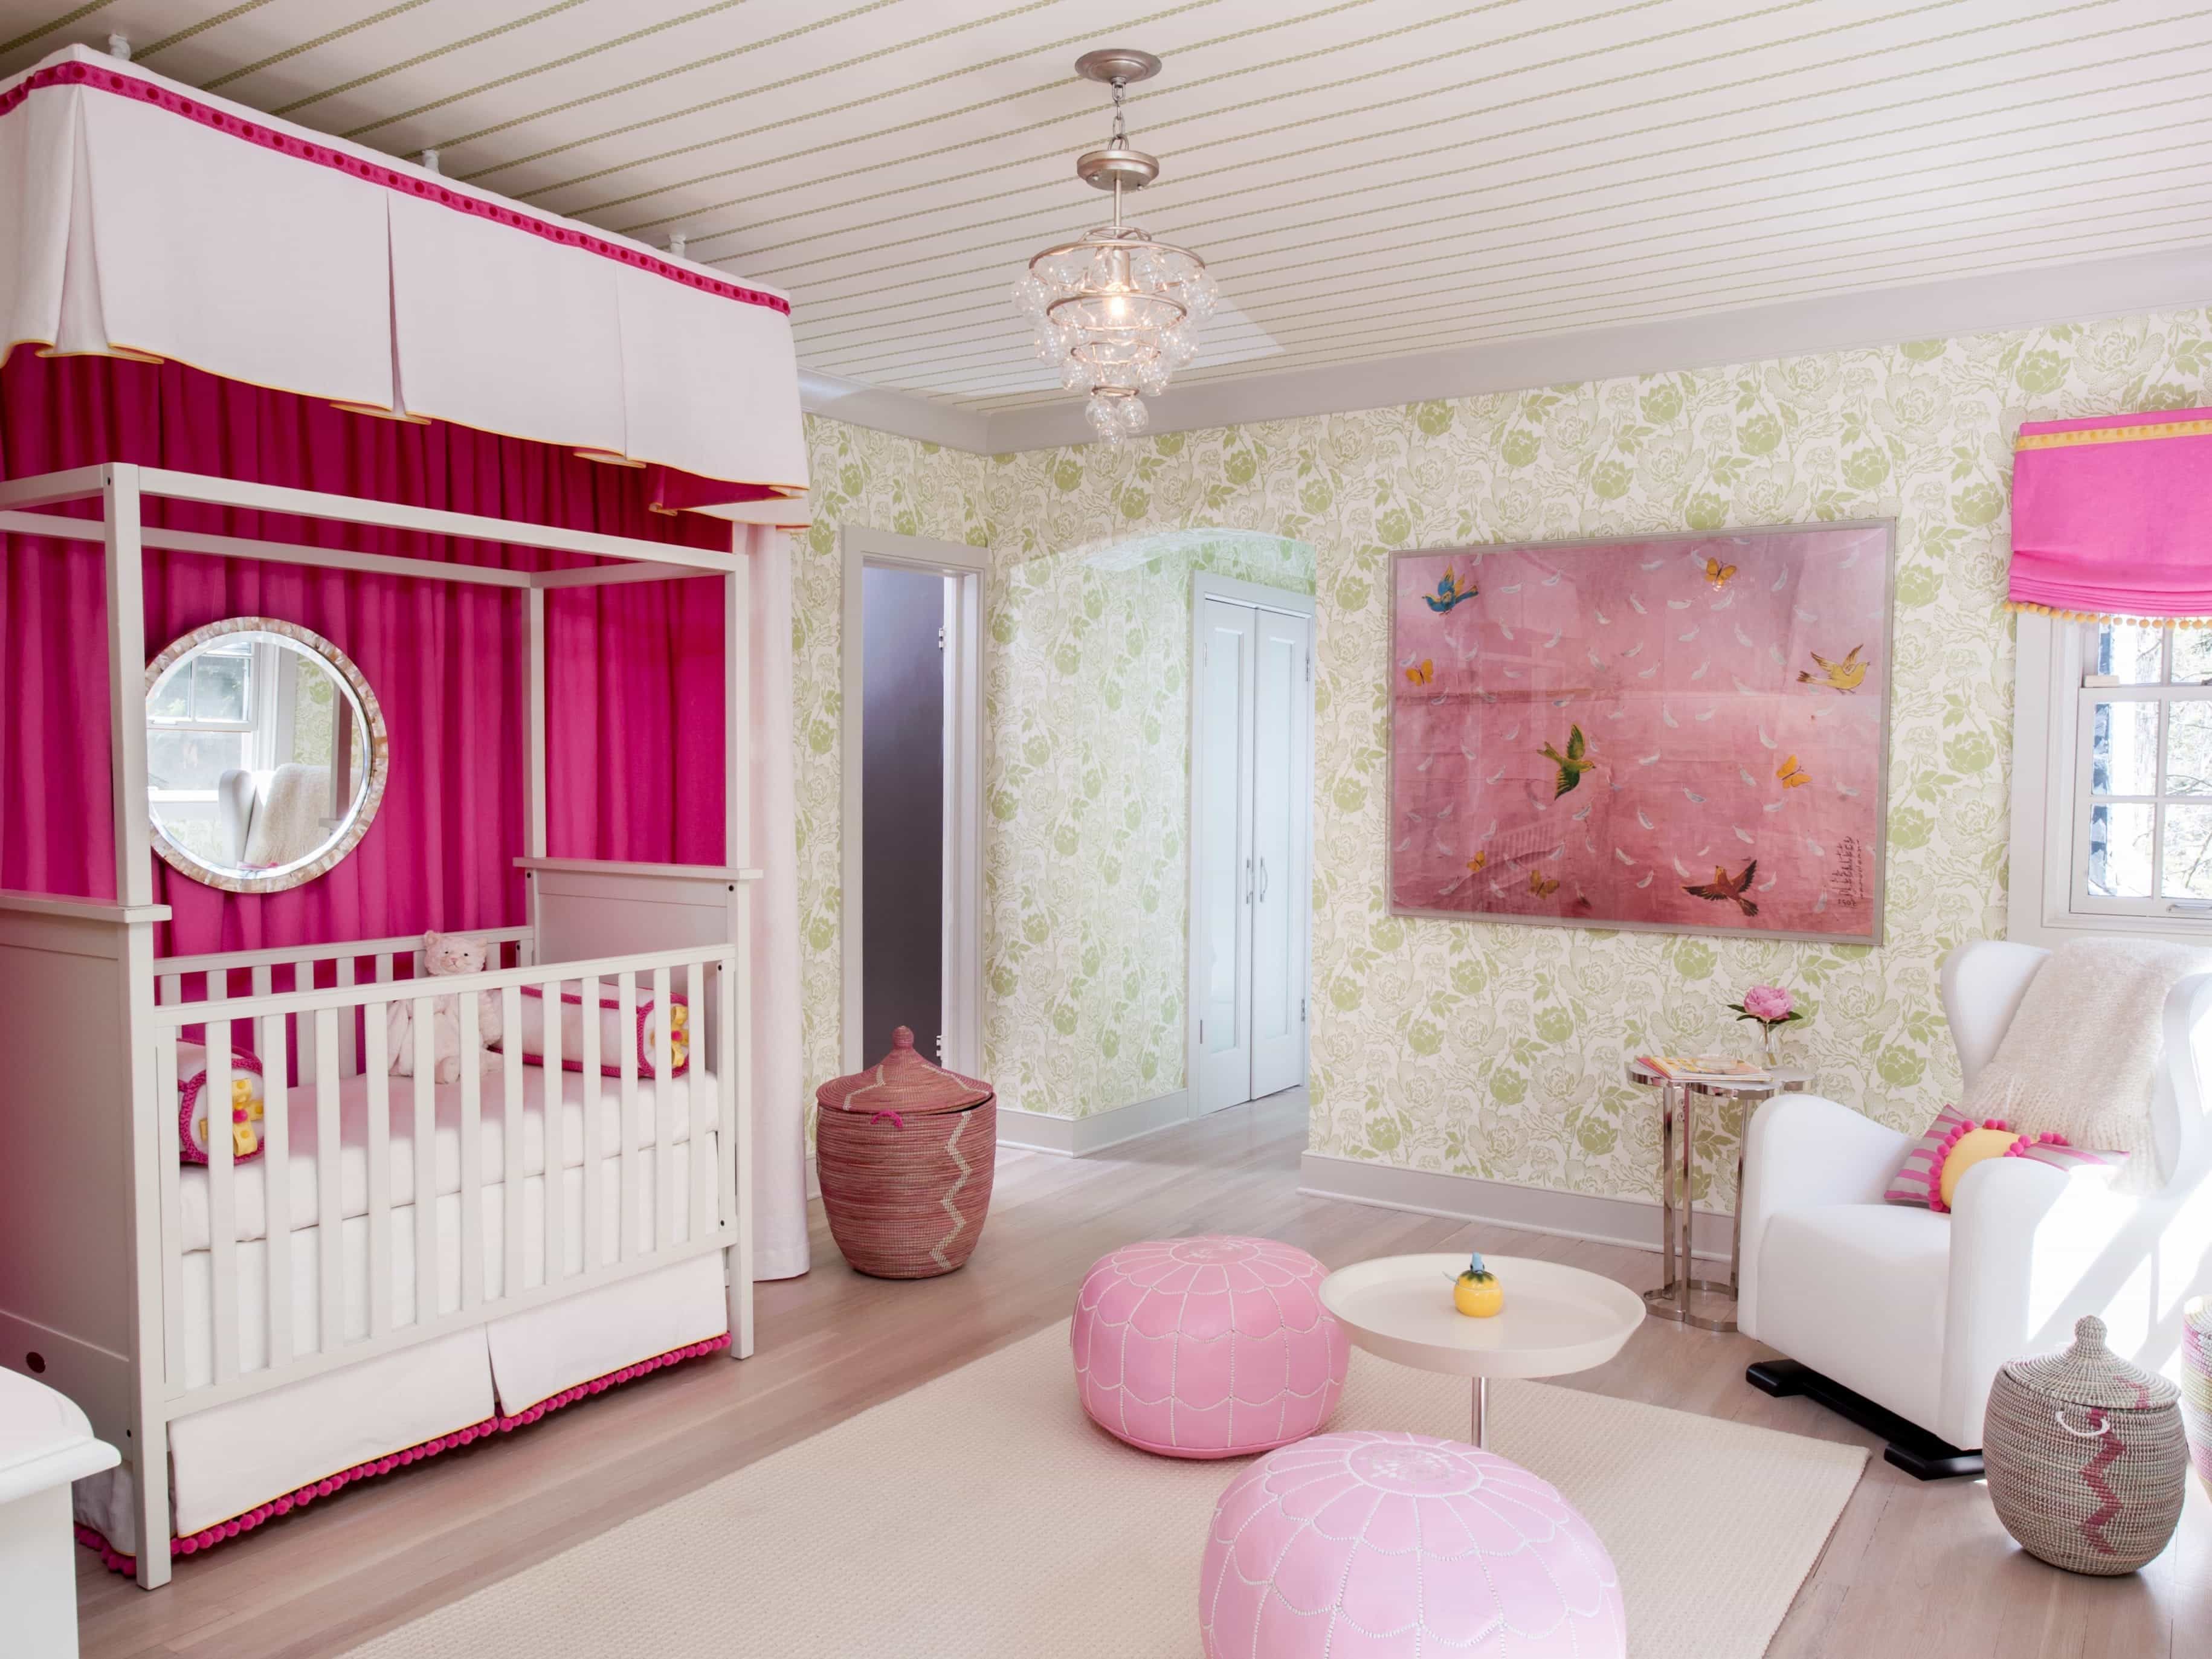 Modern Cute Nursery With Colorful Accents (View 9 of 33)